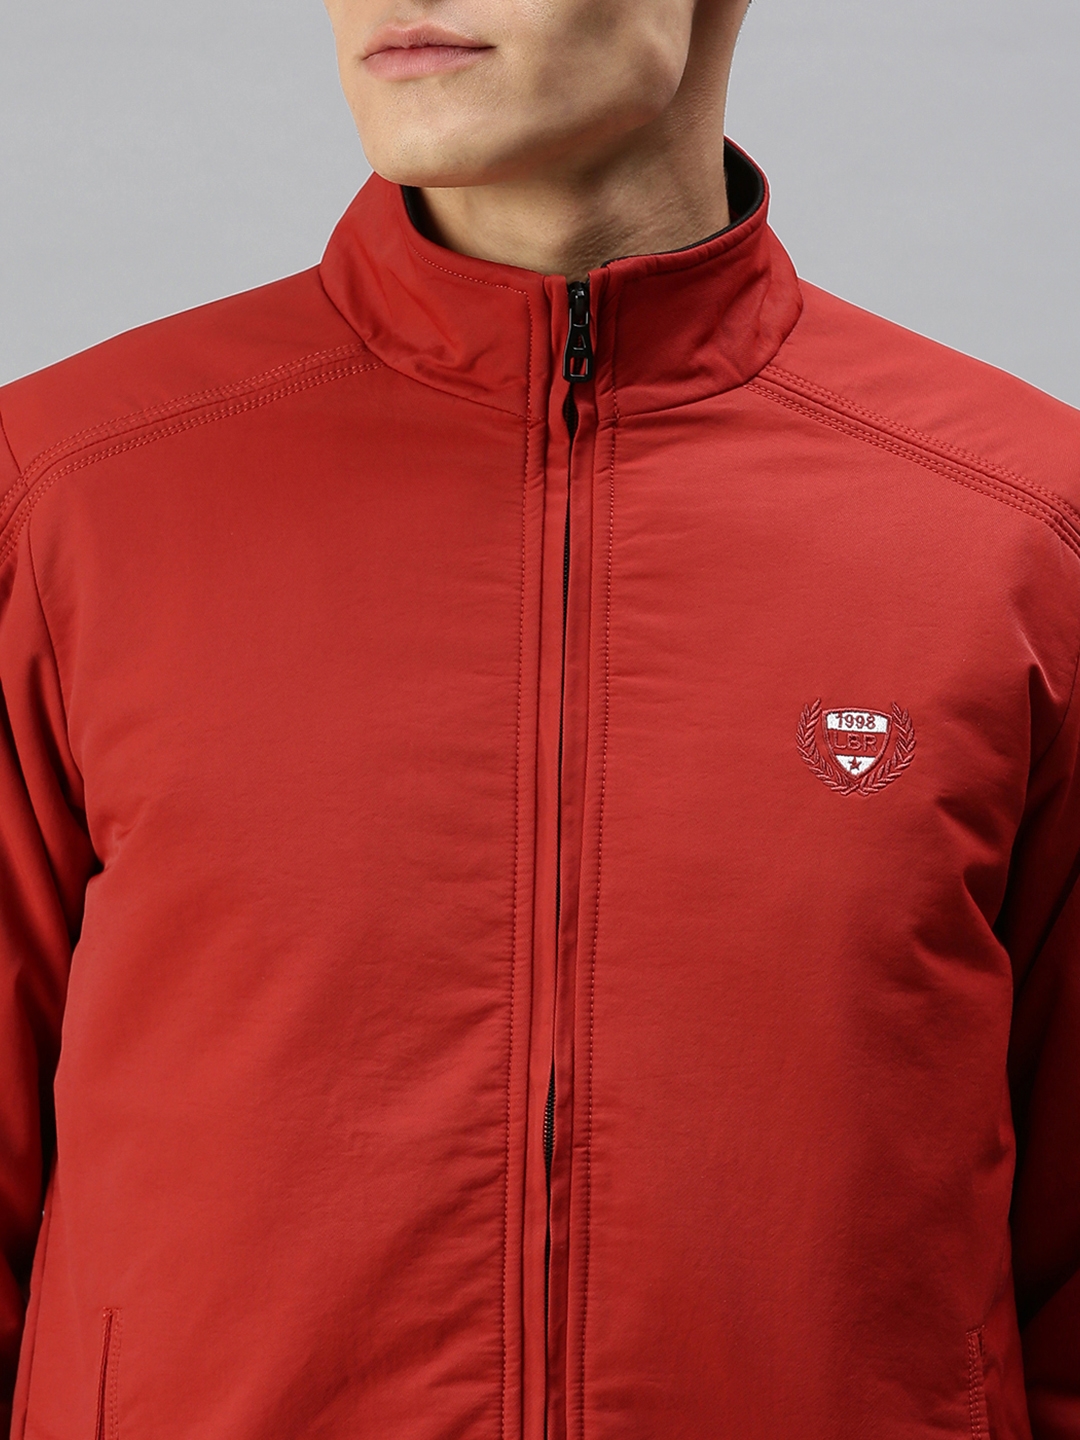 Men's Red Cotton Solid Bomber Jackets